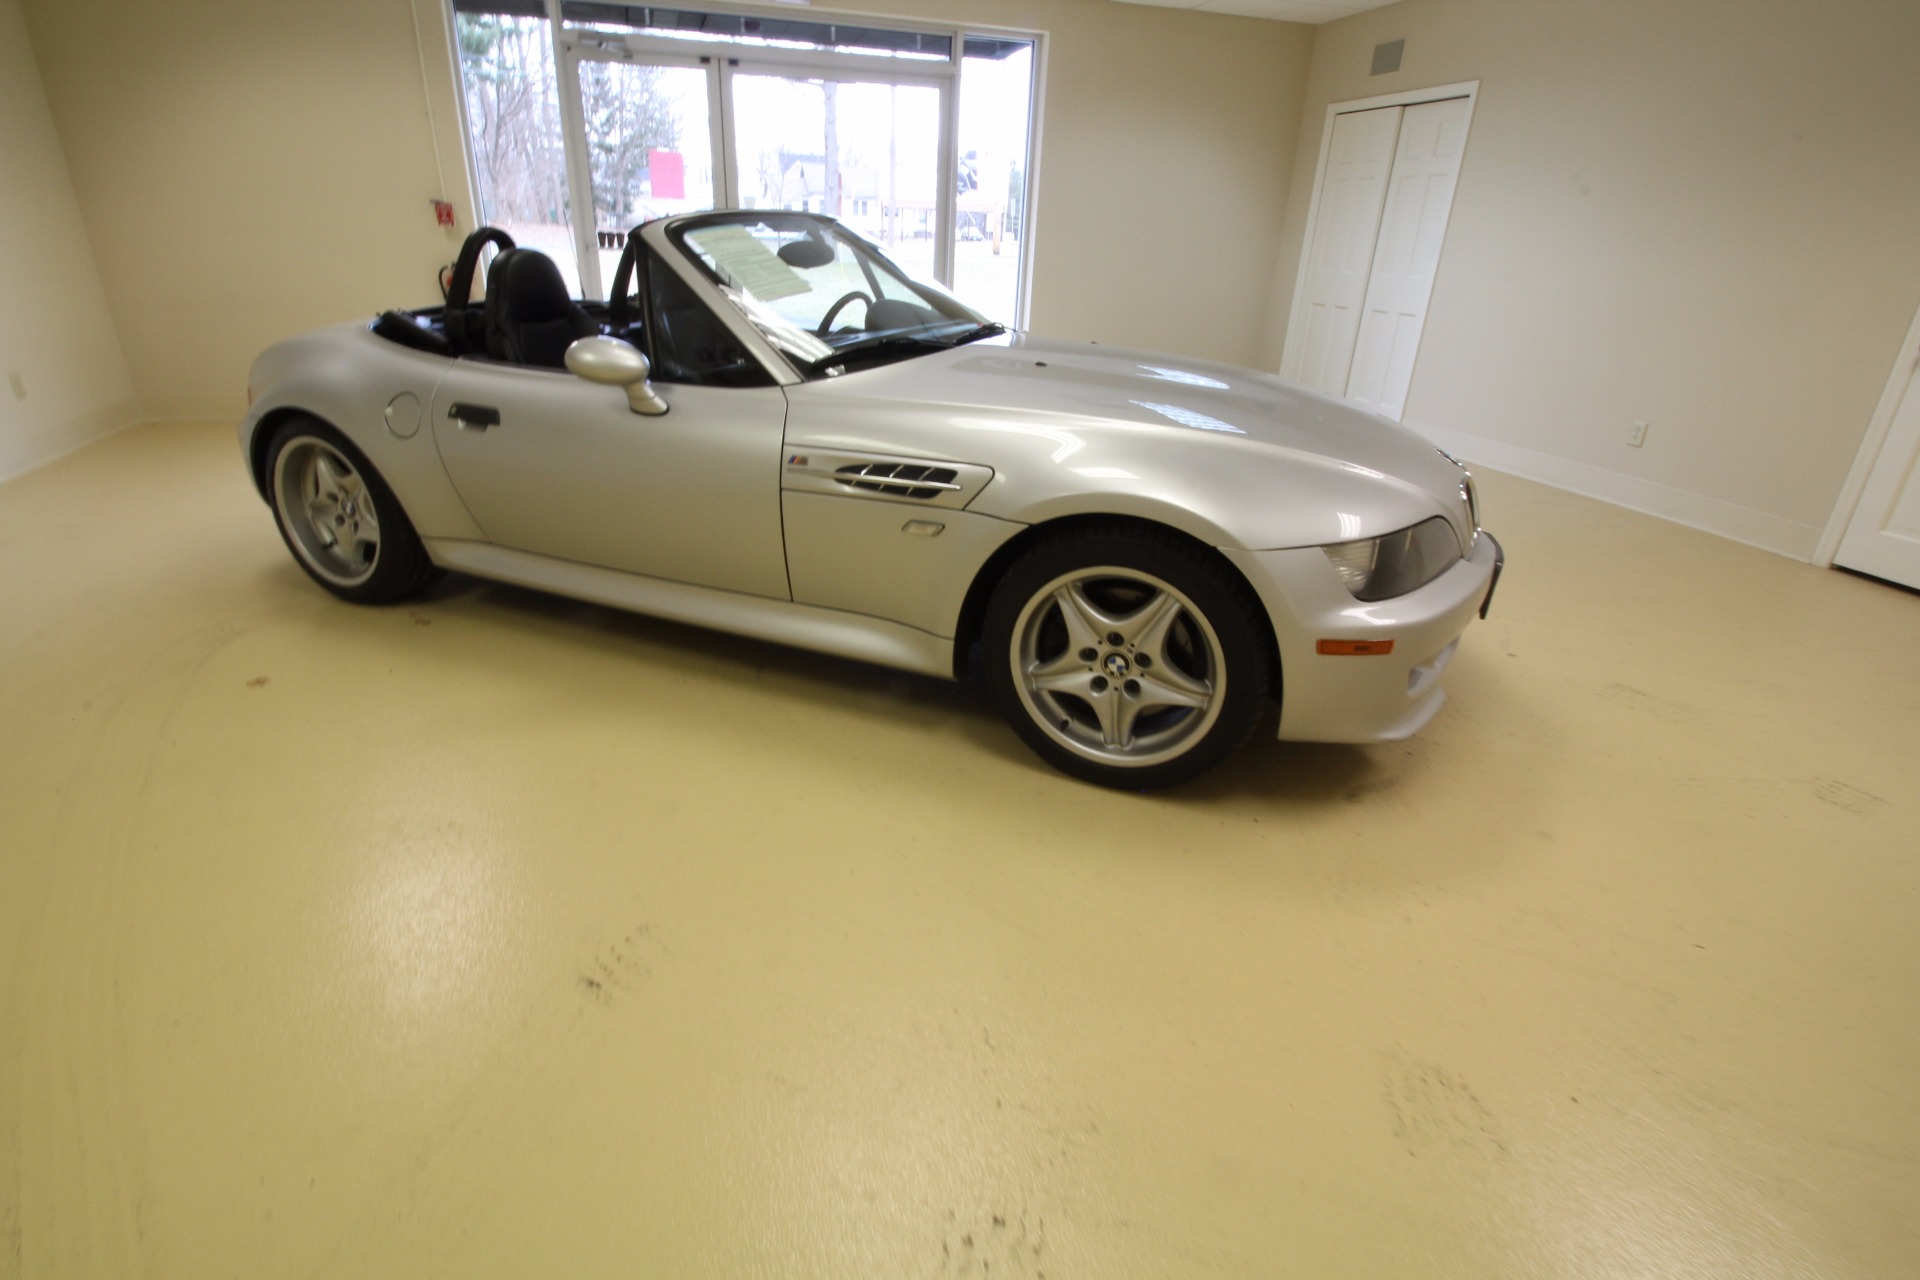 Used 2000 Titanium Silver Metallic with Black Top BMW M Roadster Base | Albany, NY